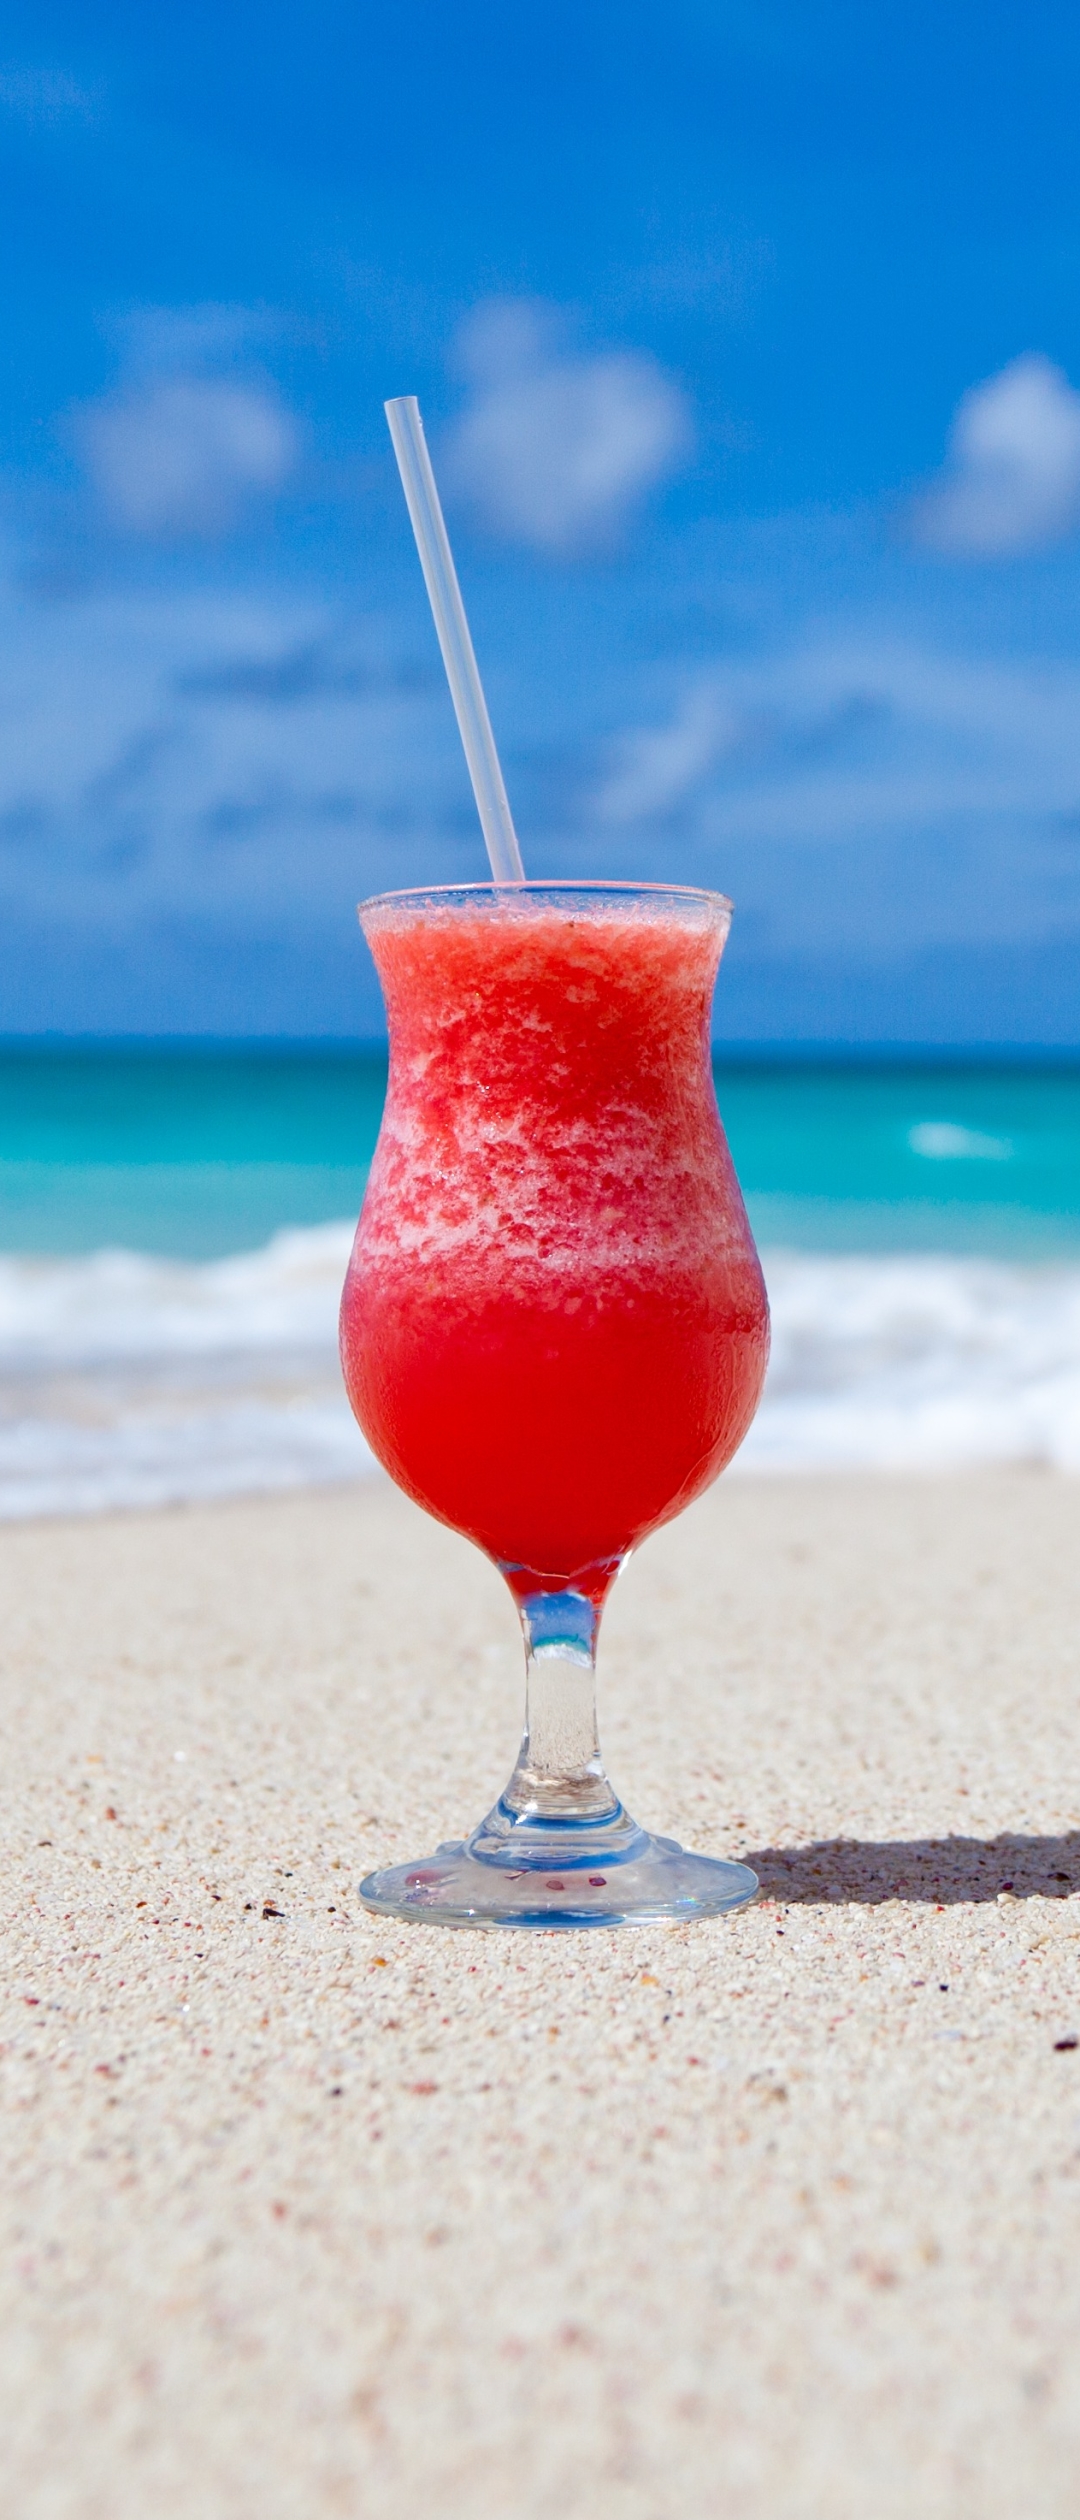 Ice cold red beverage on a caribbean beach by PublicDomainPictures